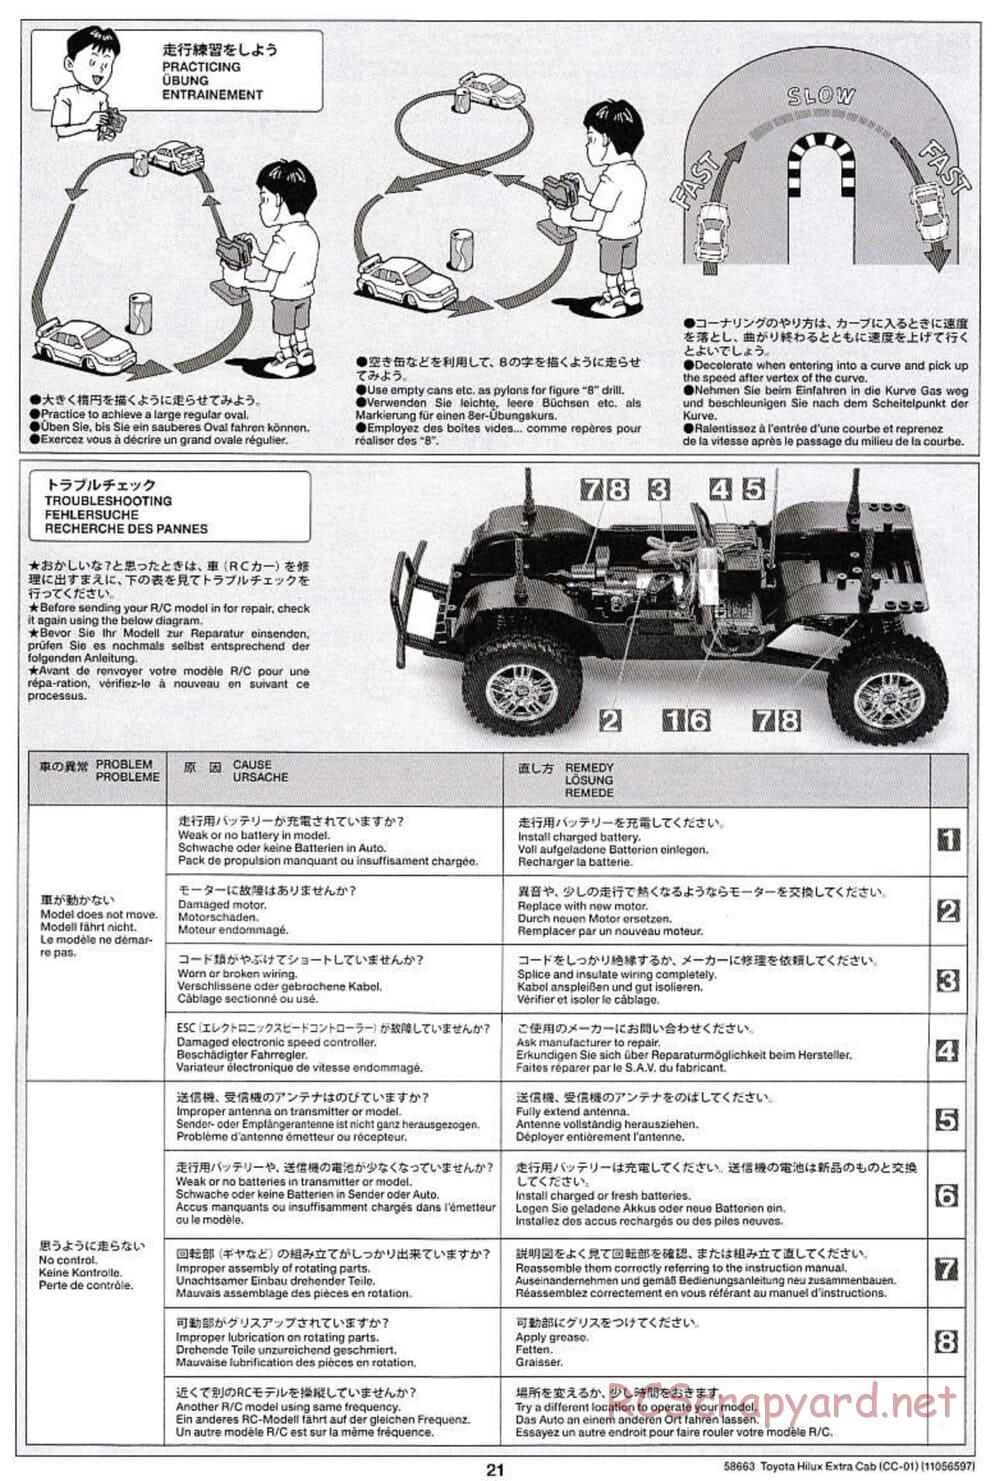 Tamiya - Toyota Hilux Extra Cab - CC-01 Chassis - Manual - Page 21